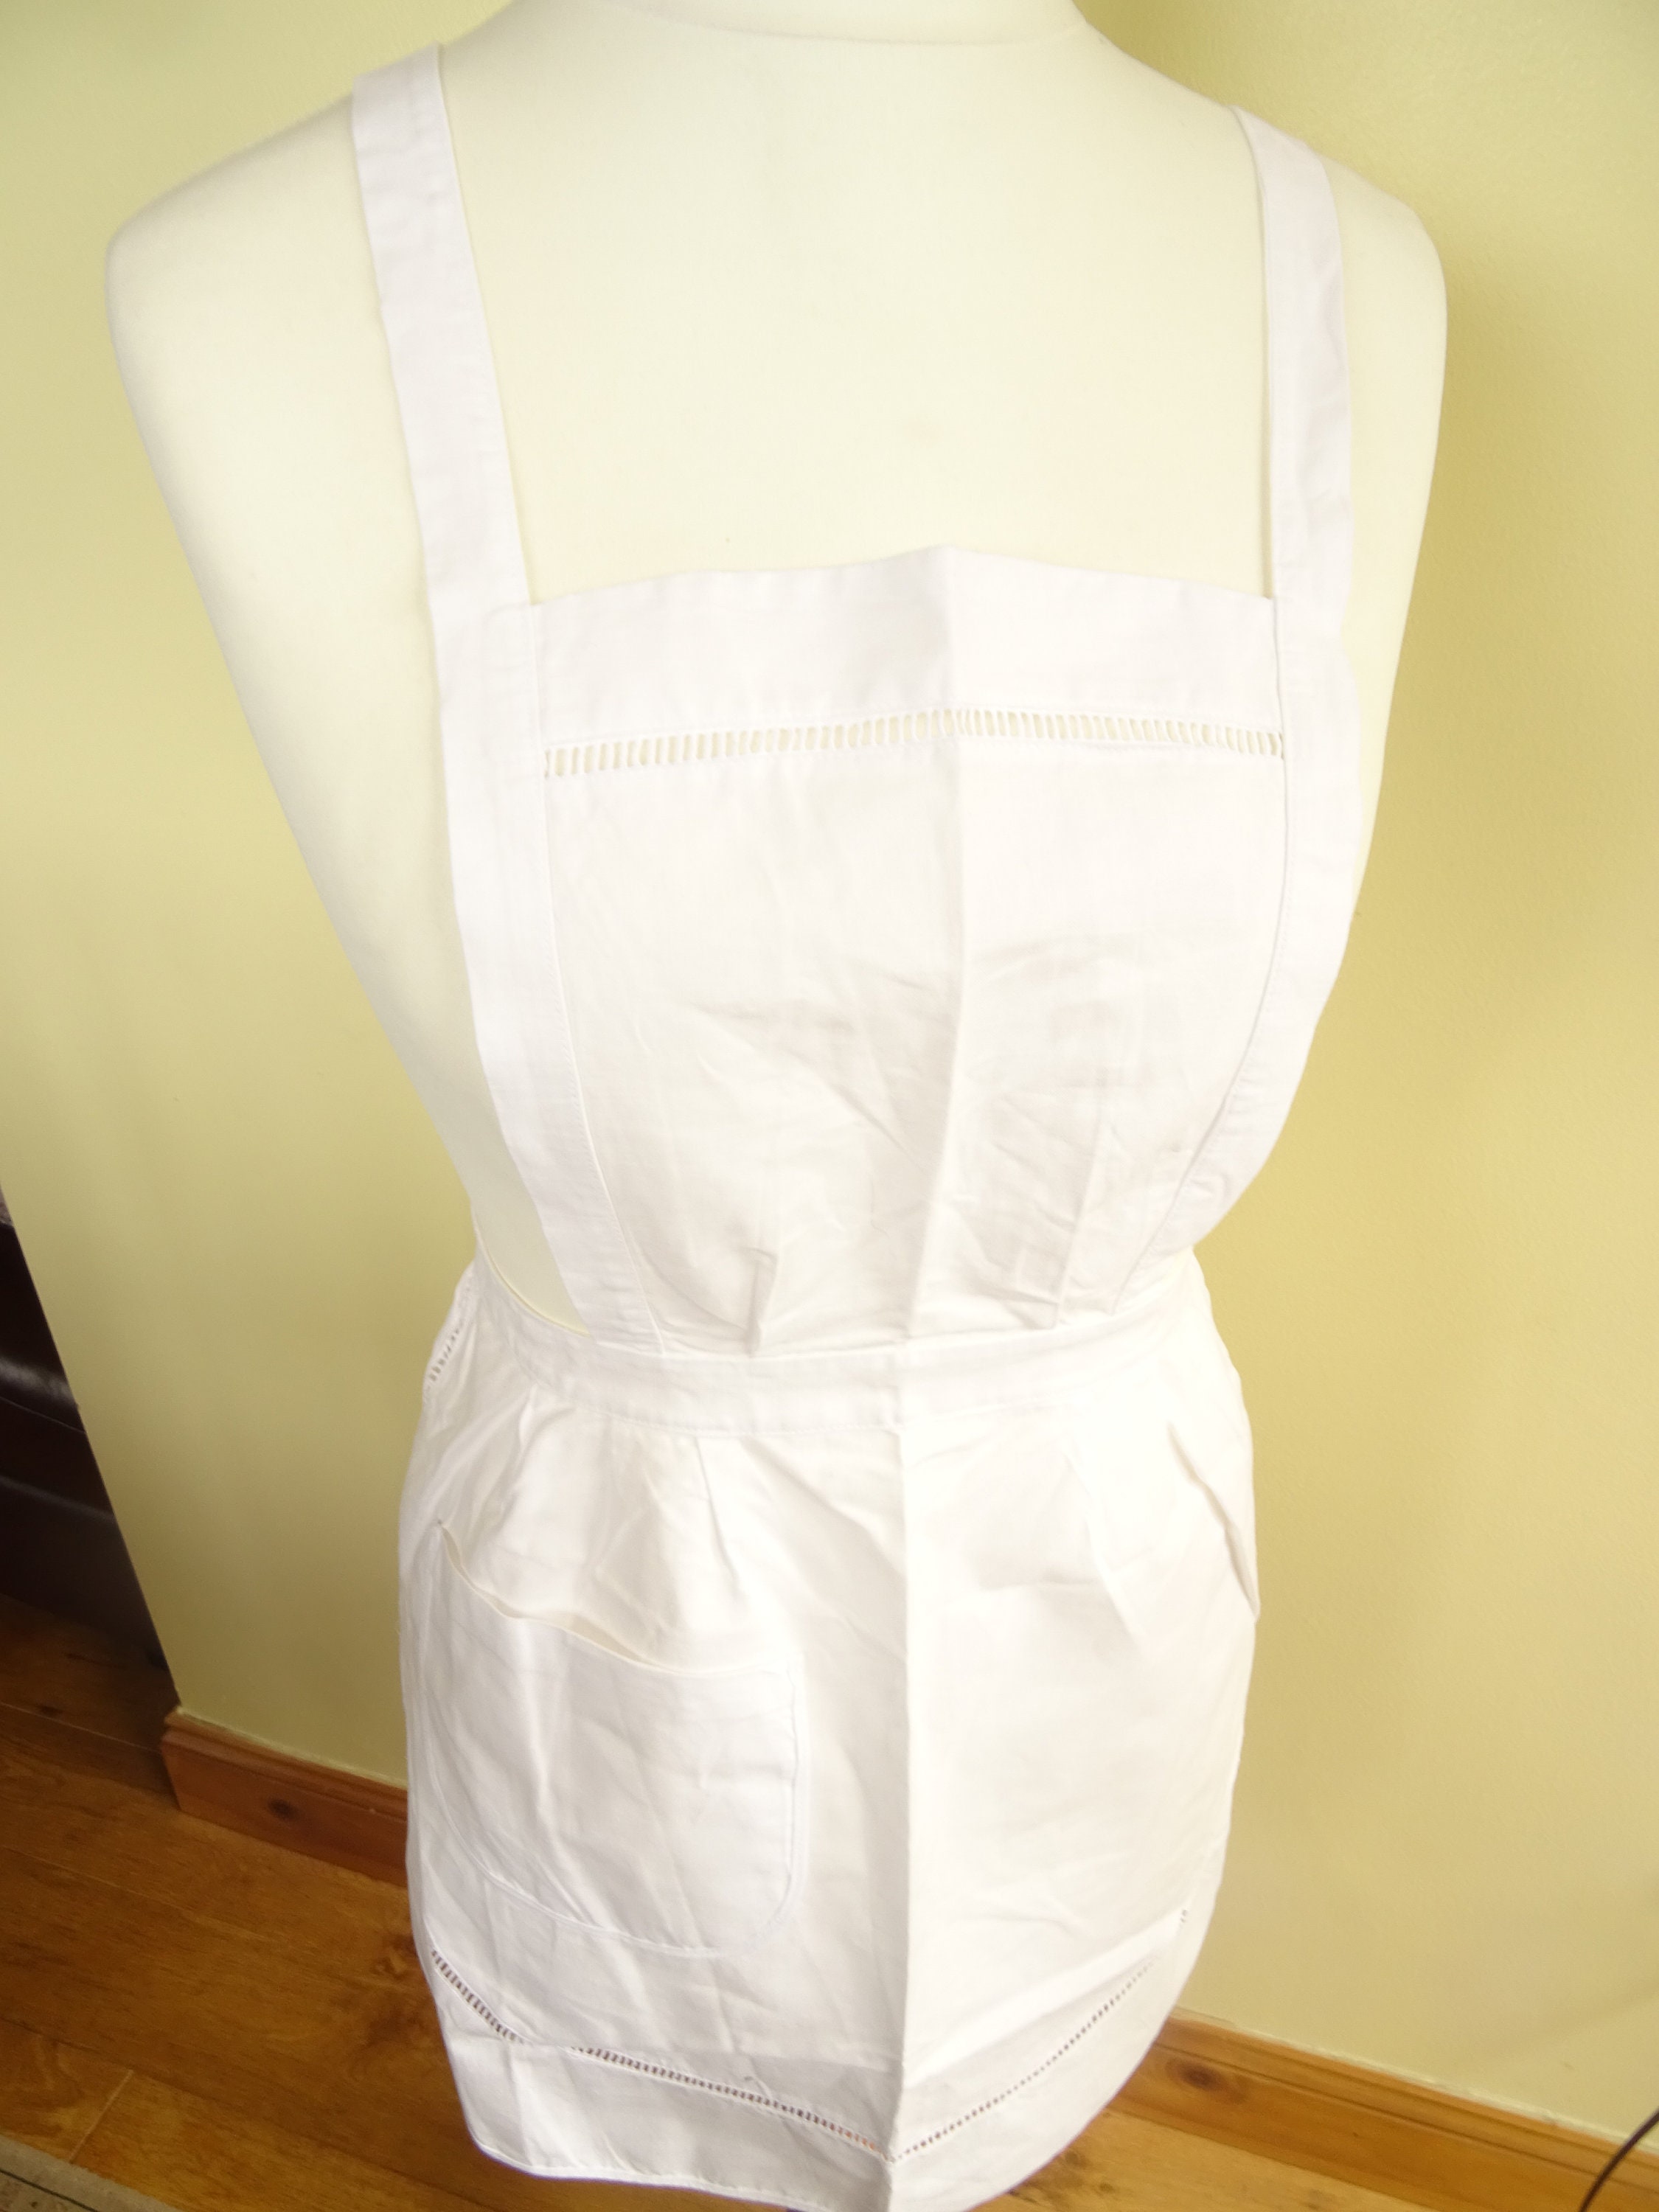 Vintage Aprons, Retro Aprons, Old Fashioned Aprons & Patterns Vintage Short White French MaidsCafe Apron From The 1930s40S $39.64 AT vintagedancer.com